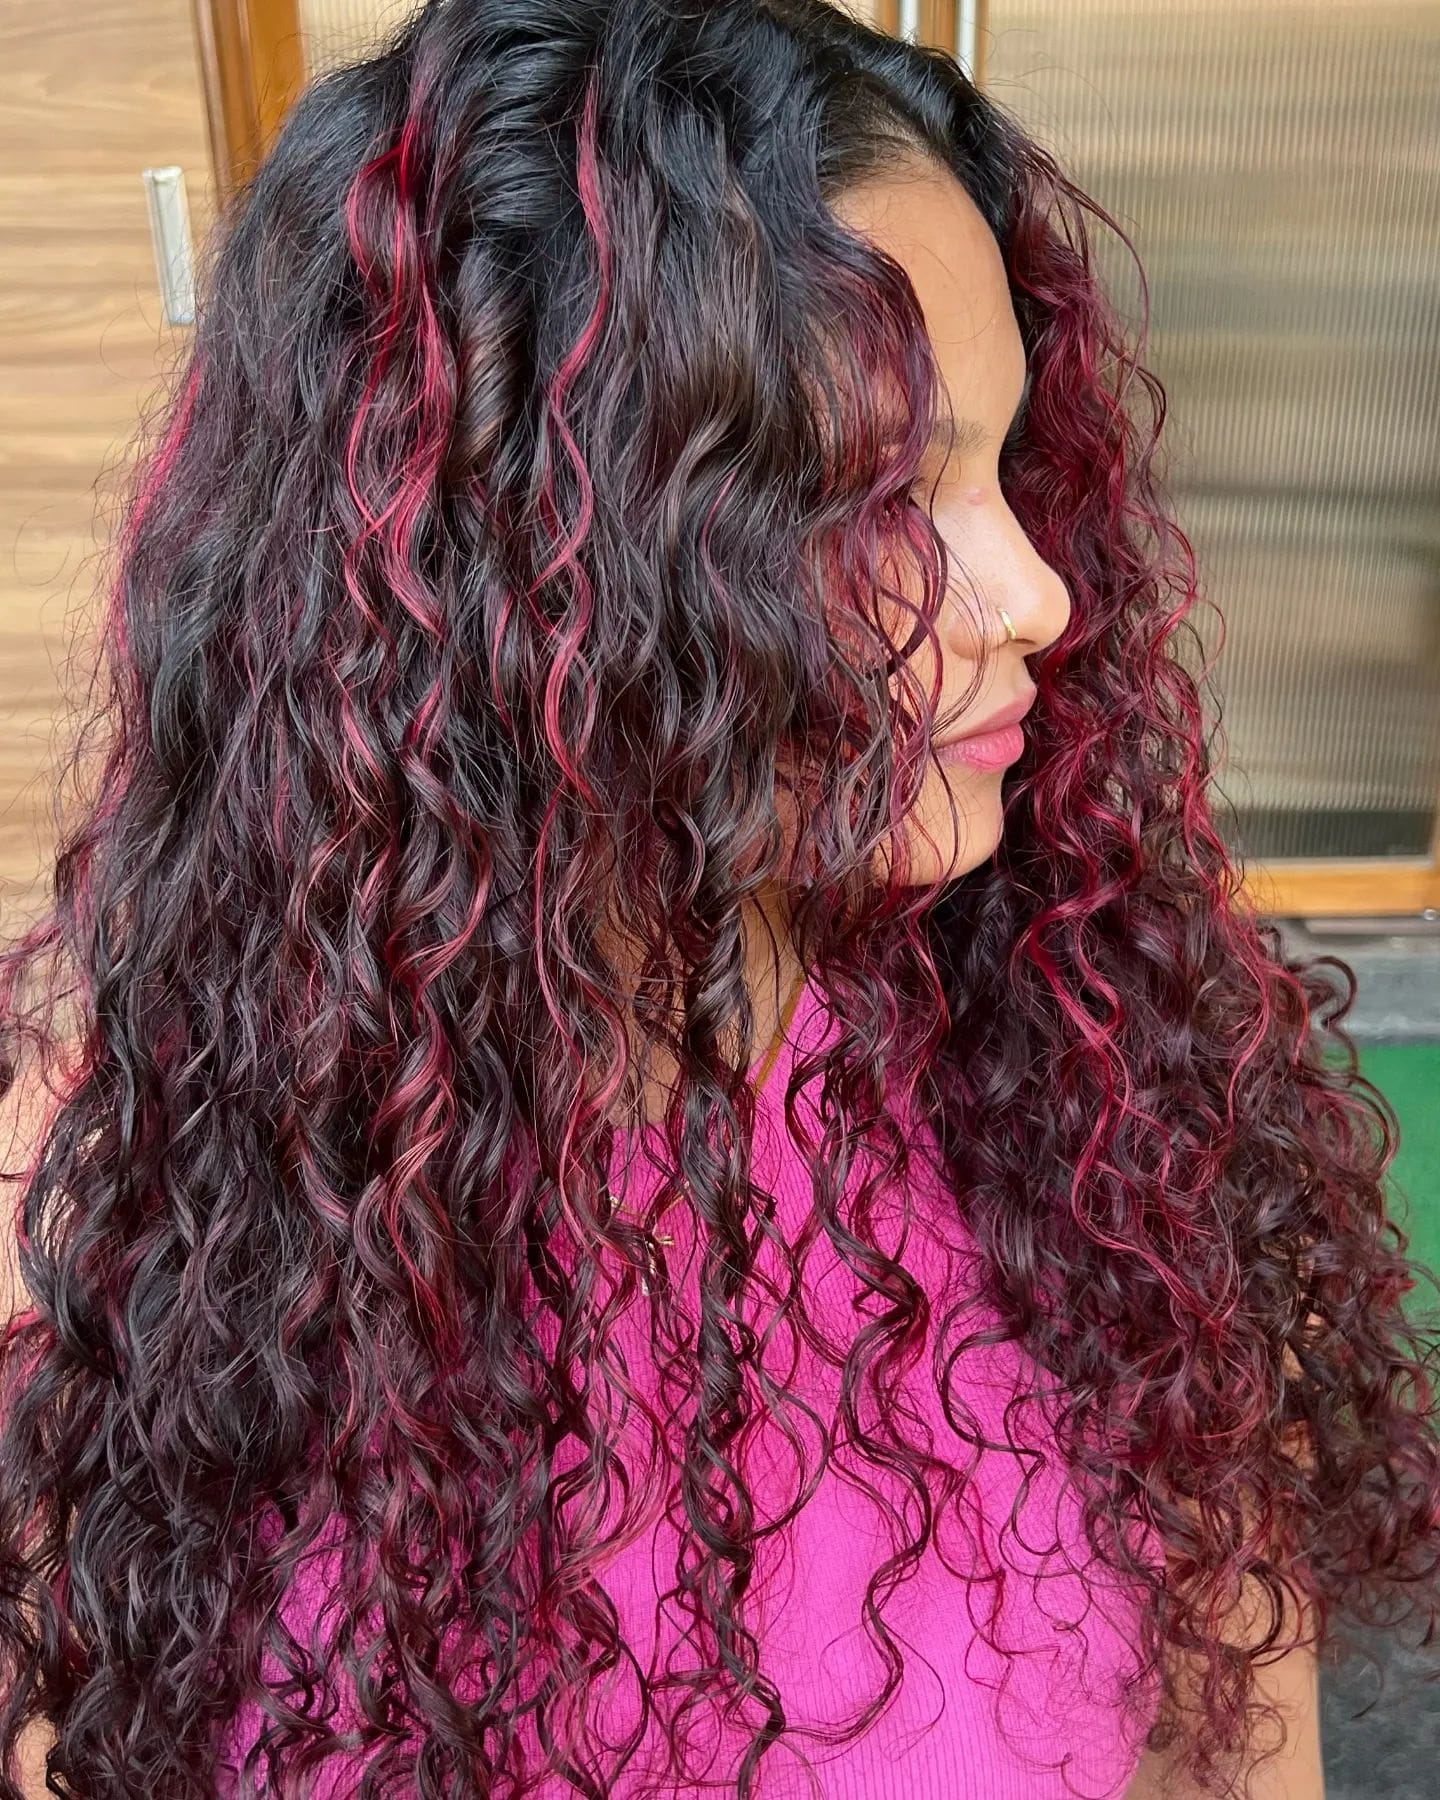 Black and Cherry Hair Mix